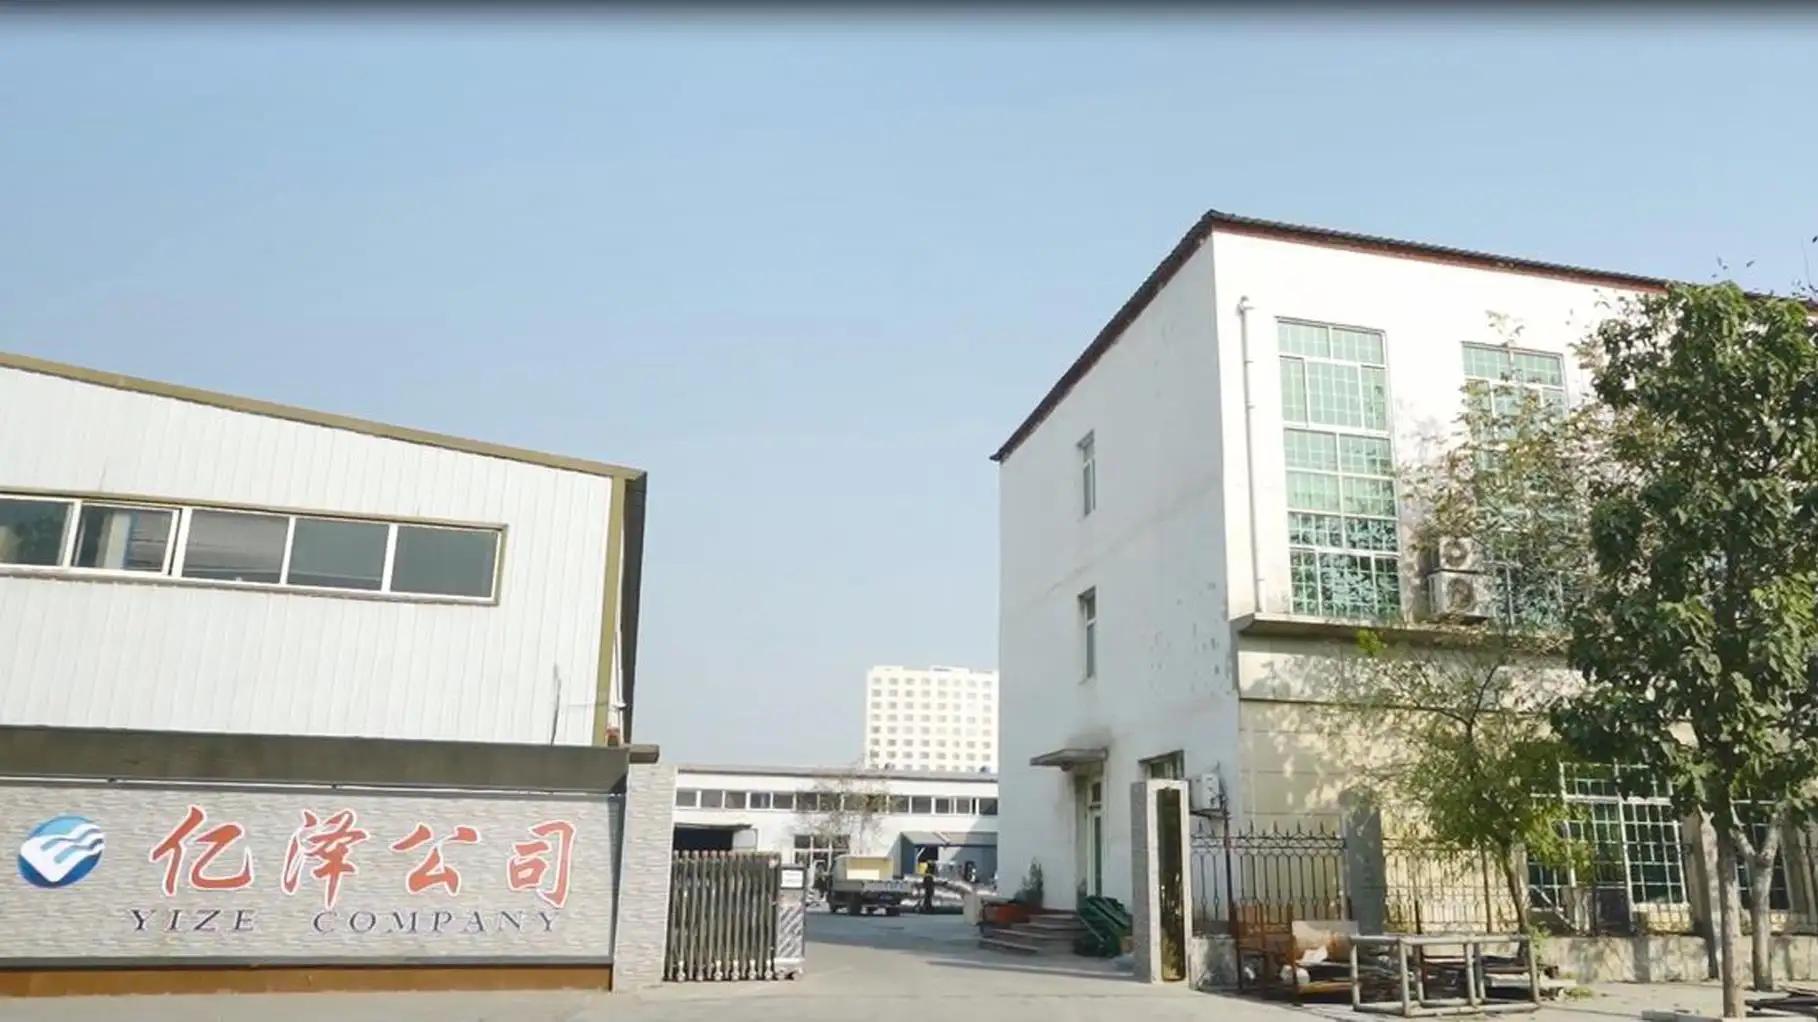 Anping County Yize Metal Products Co., Ltd.